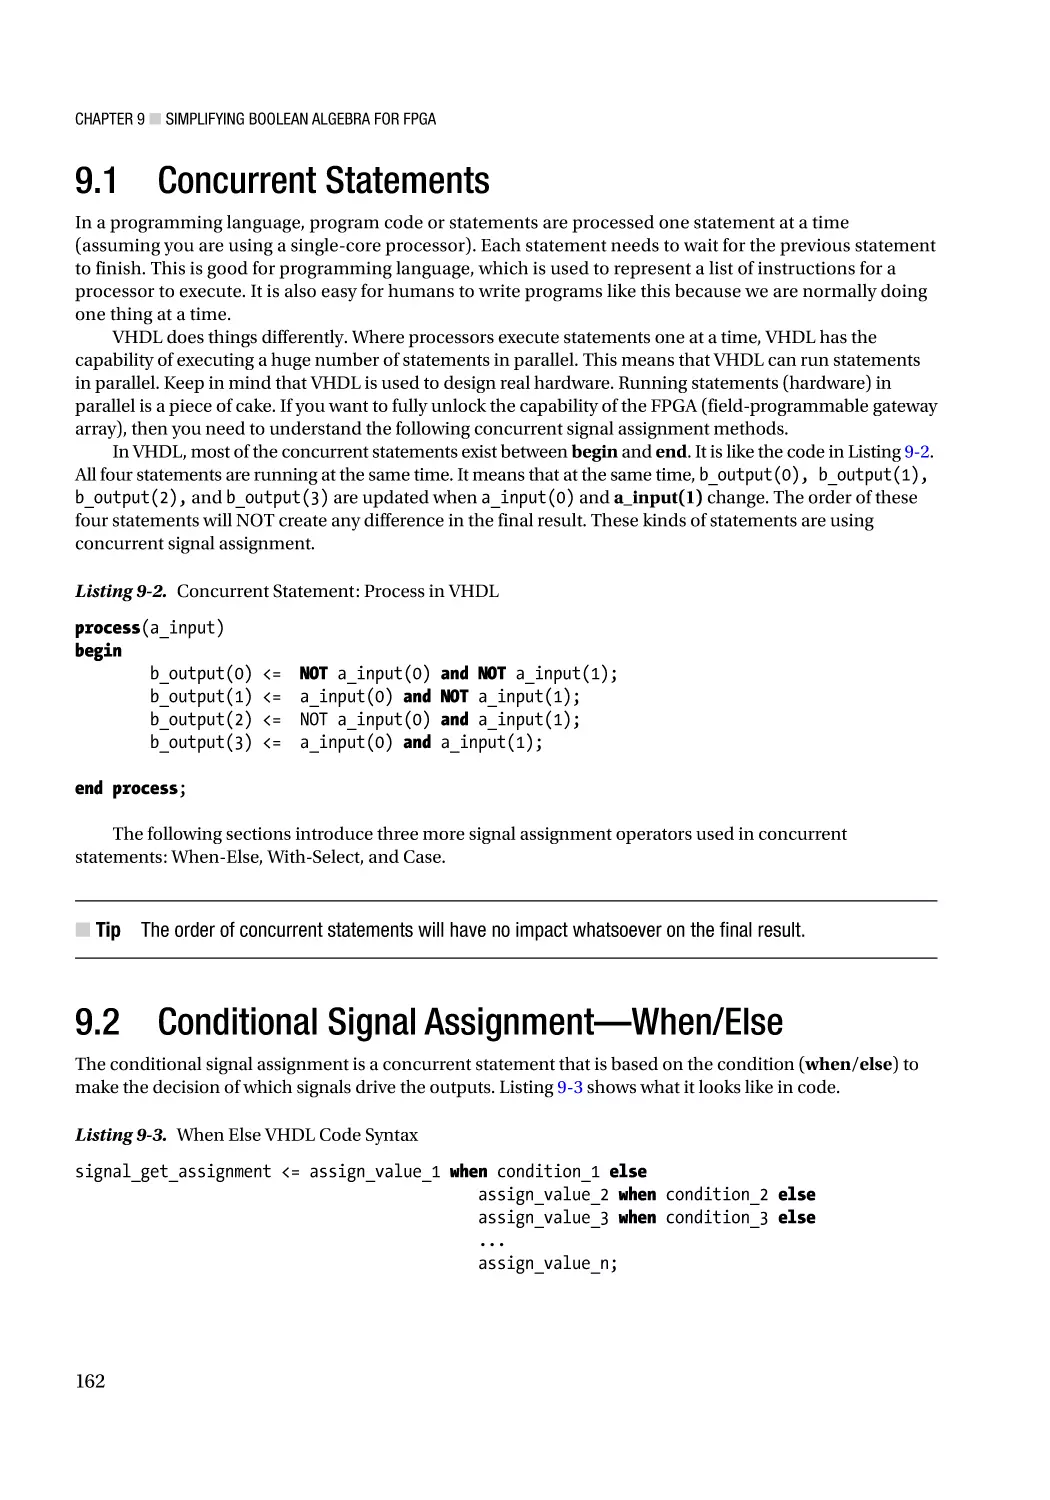 9.1 Concurrent Statements
9.2 Conditional Signal Assignment—When/Else